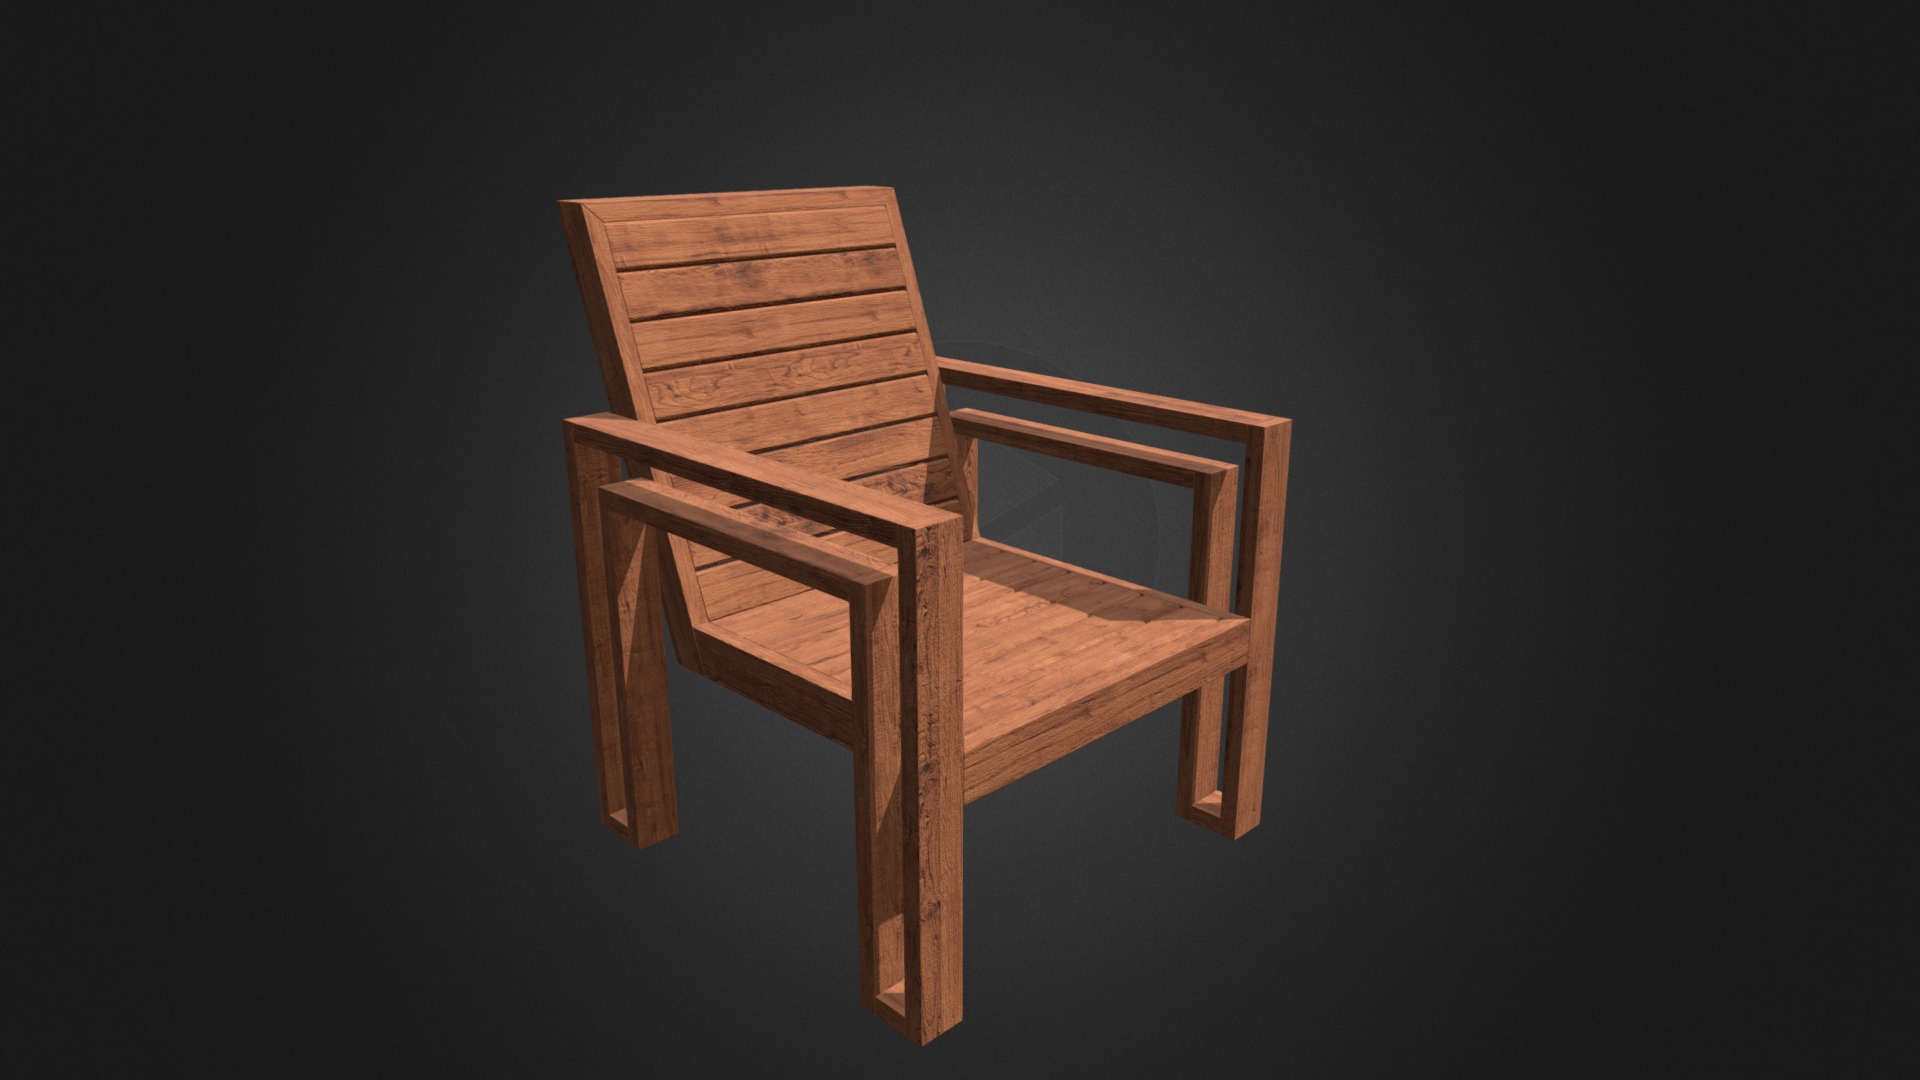 3D model Wooden Chair - This is a 3D model of the Wooden Chair. The 3D model is about a wooden chair with a black background.